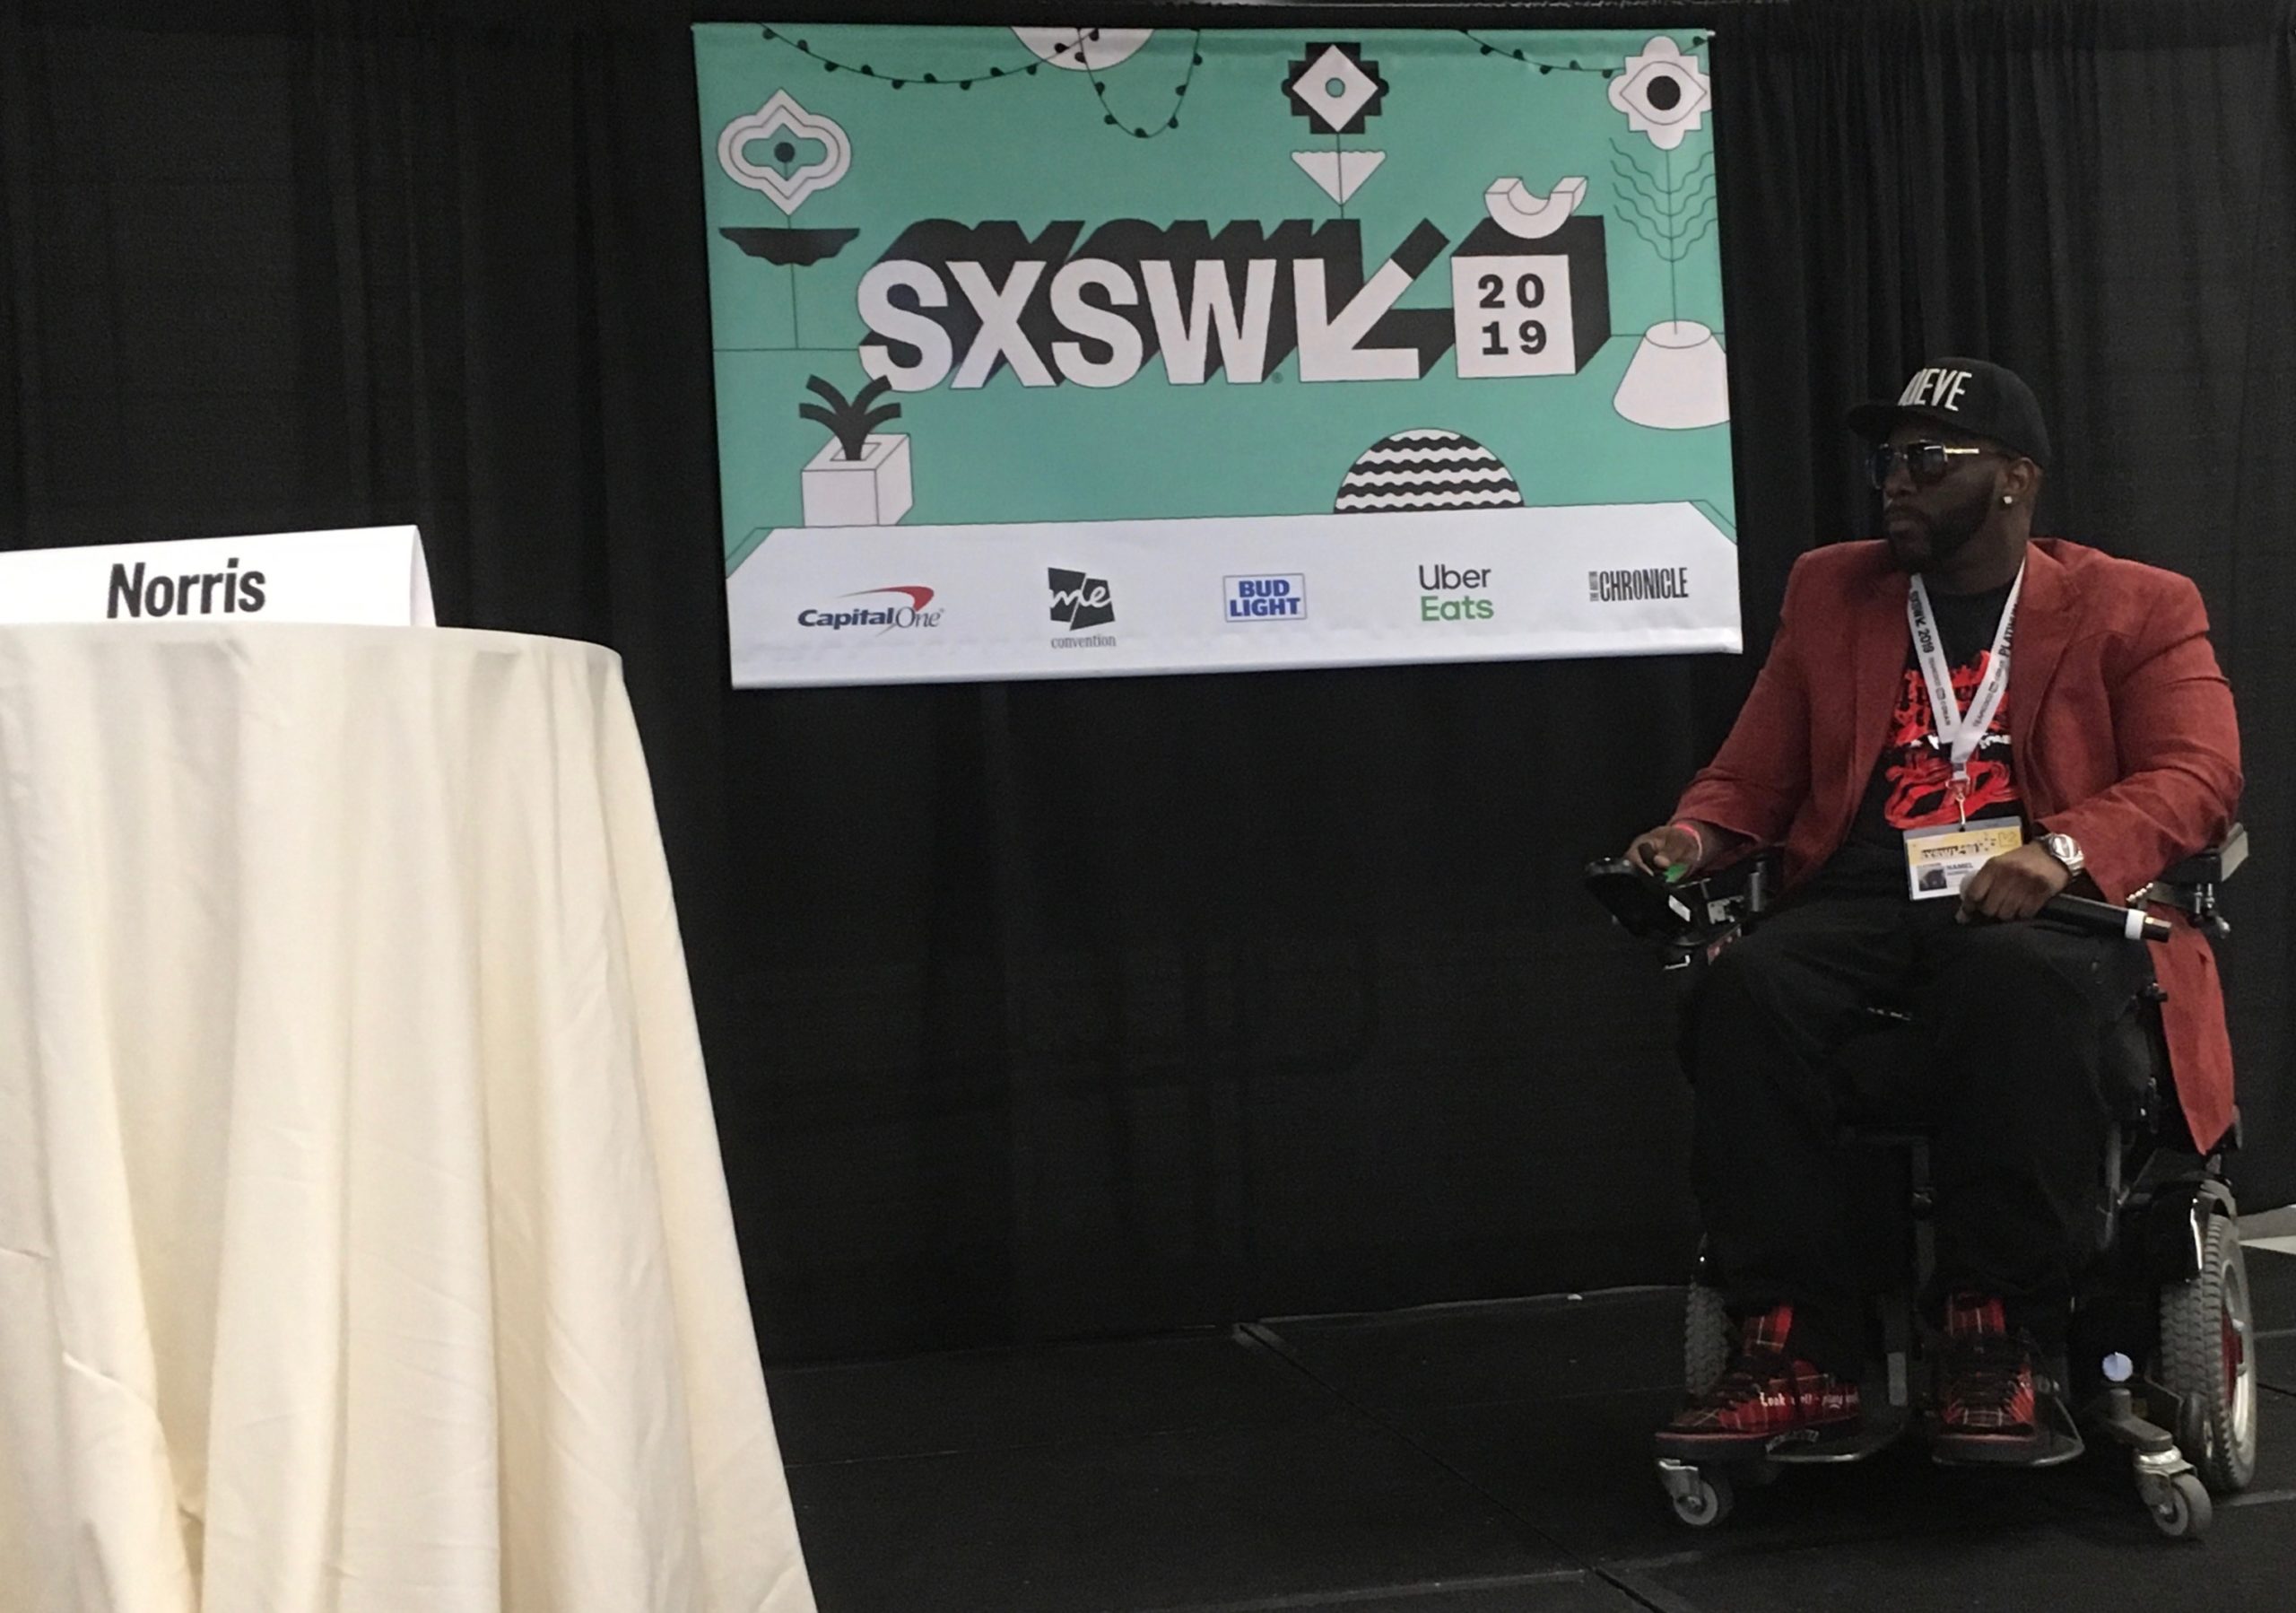 Namel Norris presenting on stage with SXSW banner on backdrop